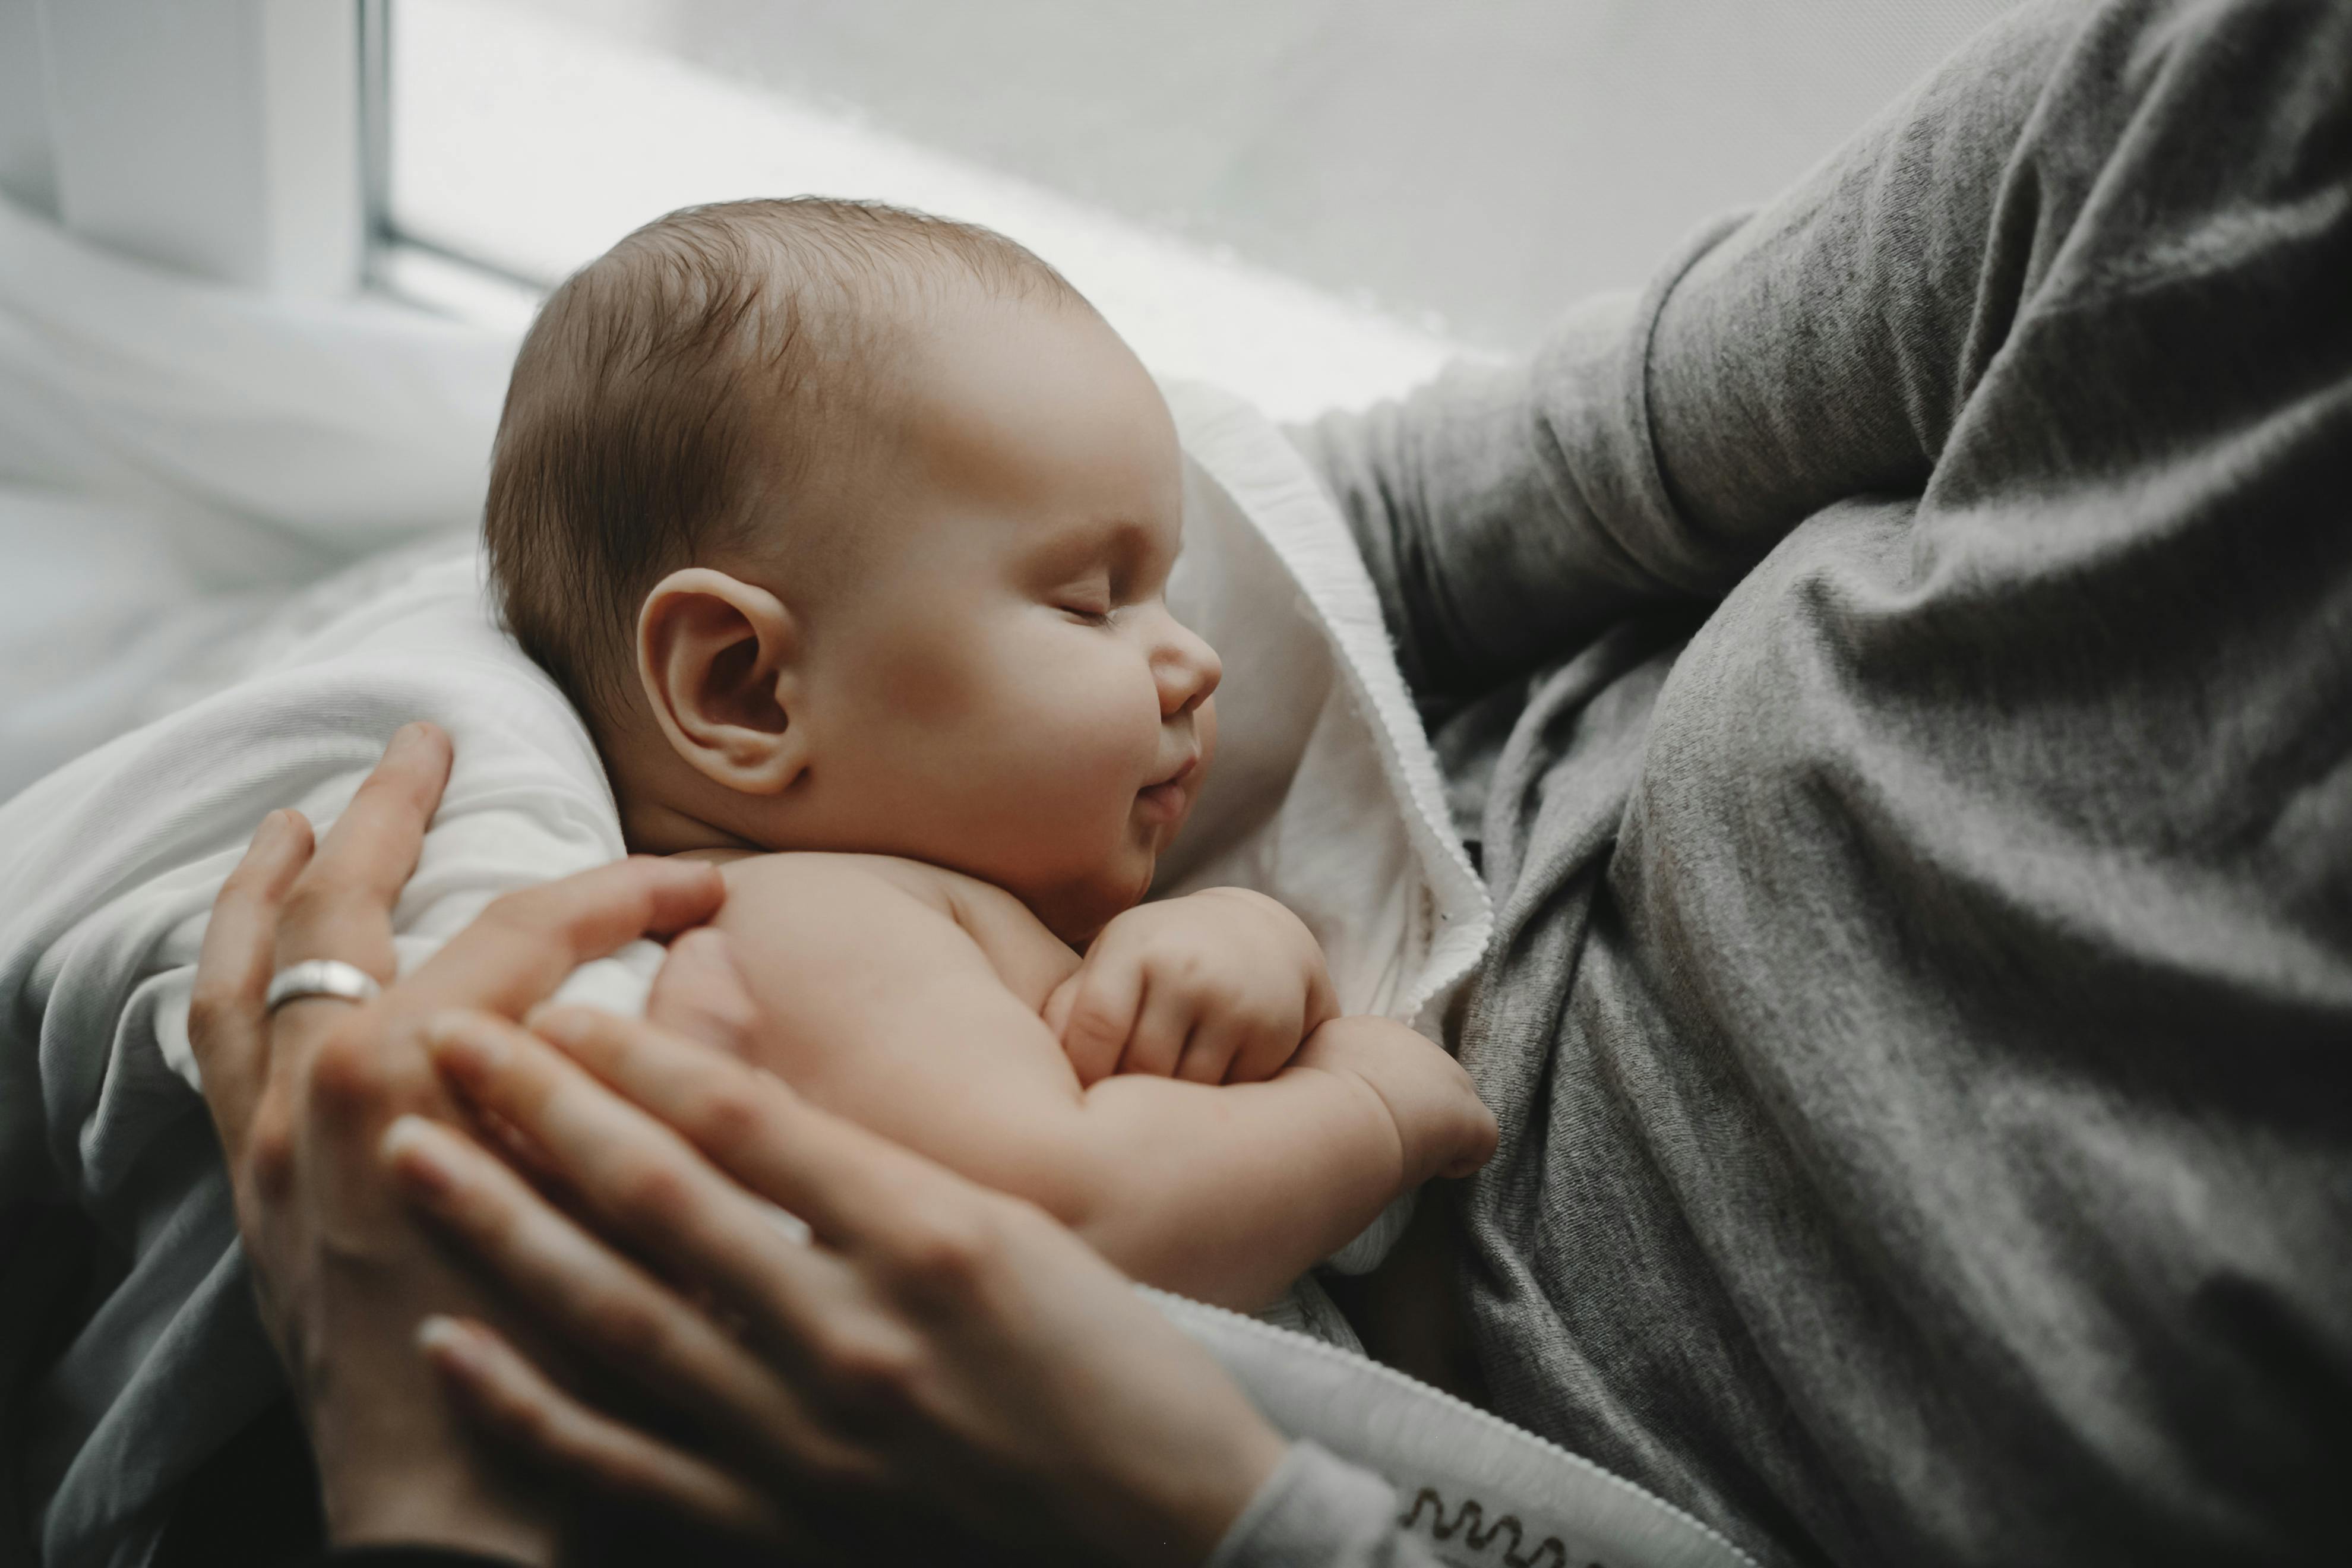 White newborn baby sleeping in white parent’s arms at home near a window